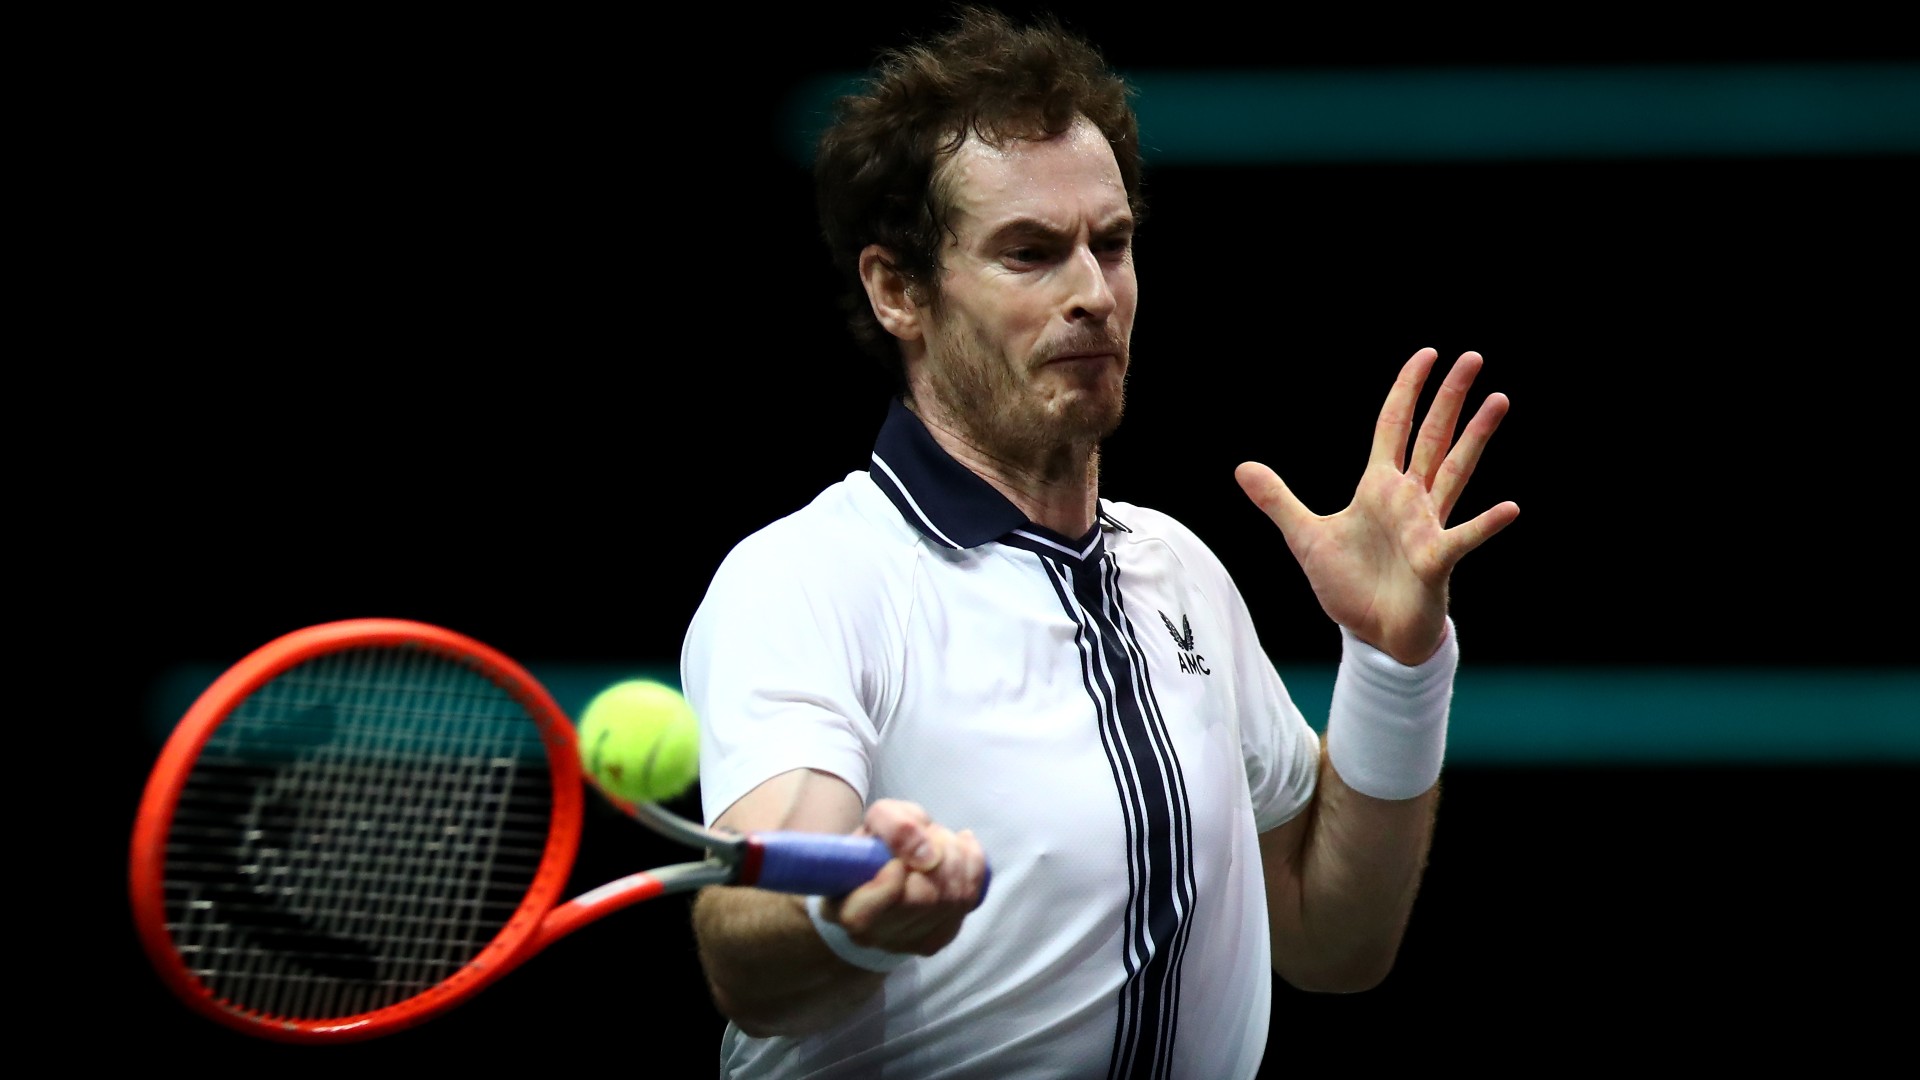 Andy Murray handed wildcard for Miami Open beIN SPORTS